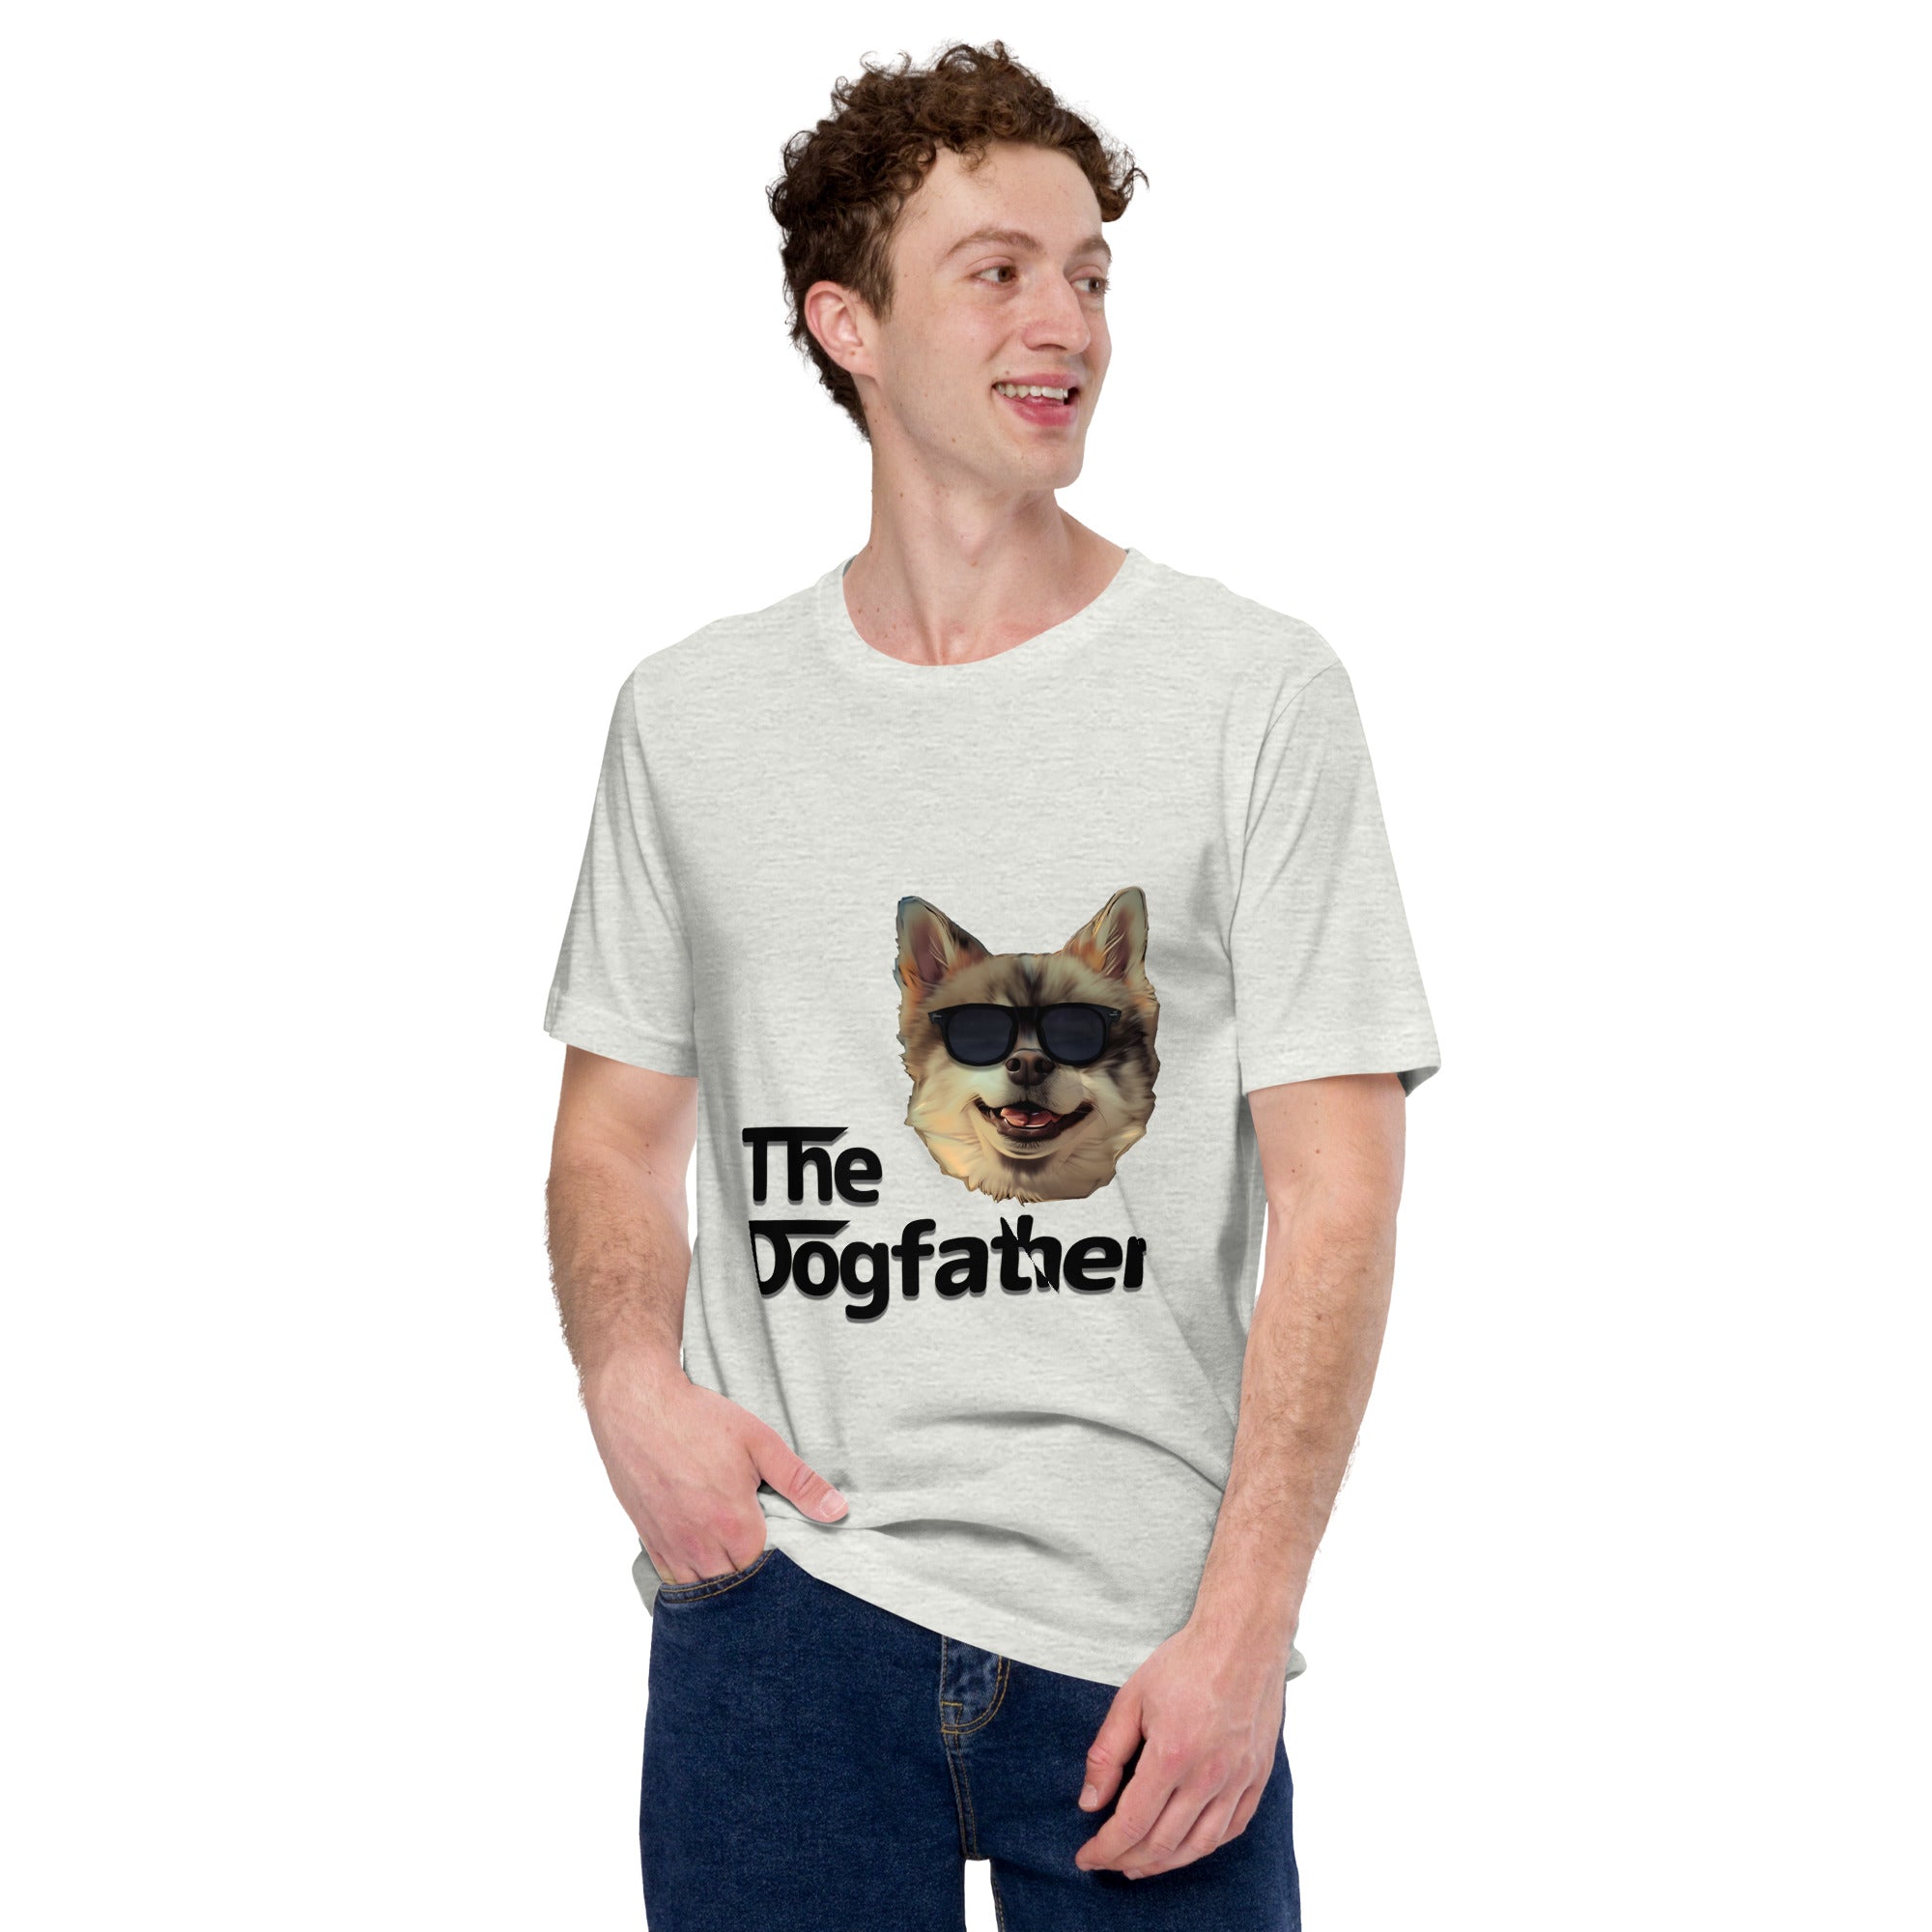 The Dogfather Tee